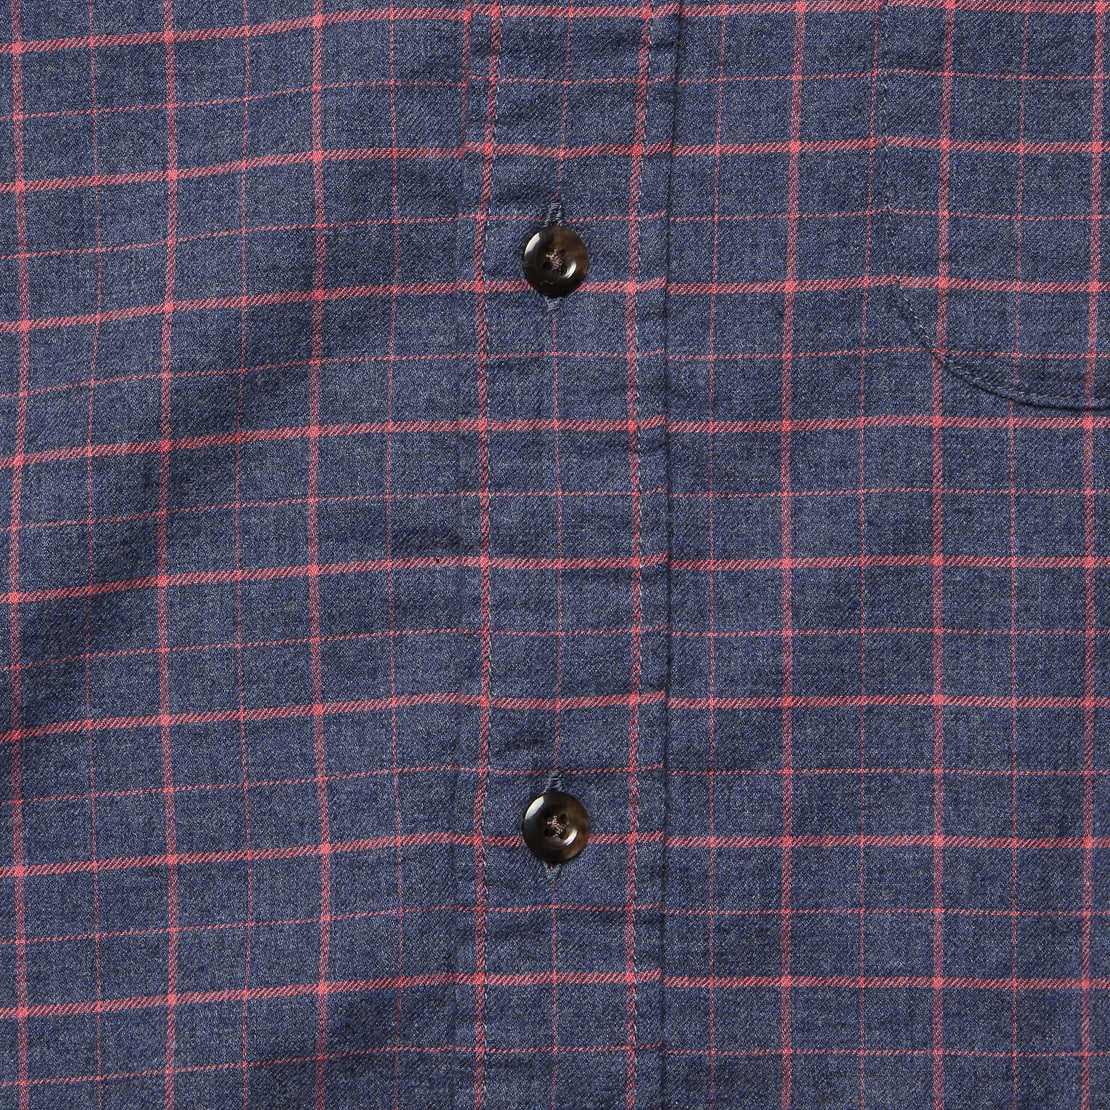 Stretch Featherweight Flannel Shirt - Hayes Check - Faherty - STAG Provisions - Tops - L/S Woven - Plaid